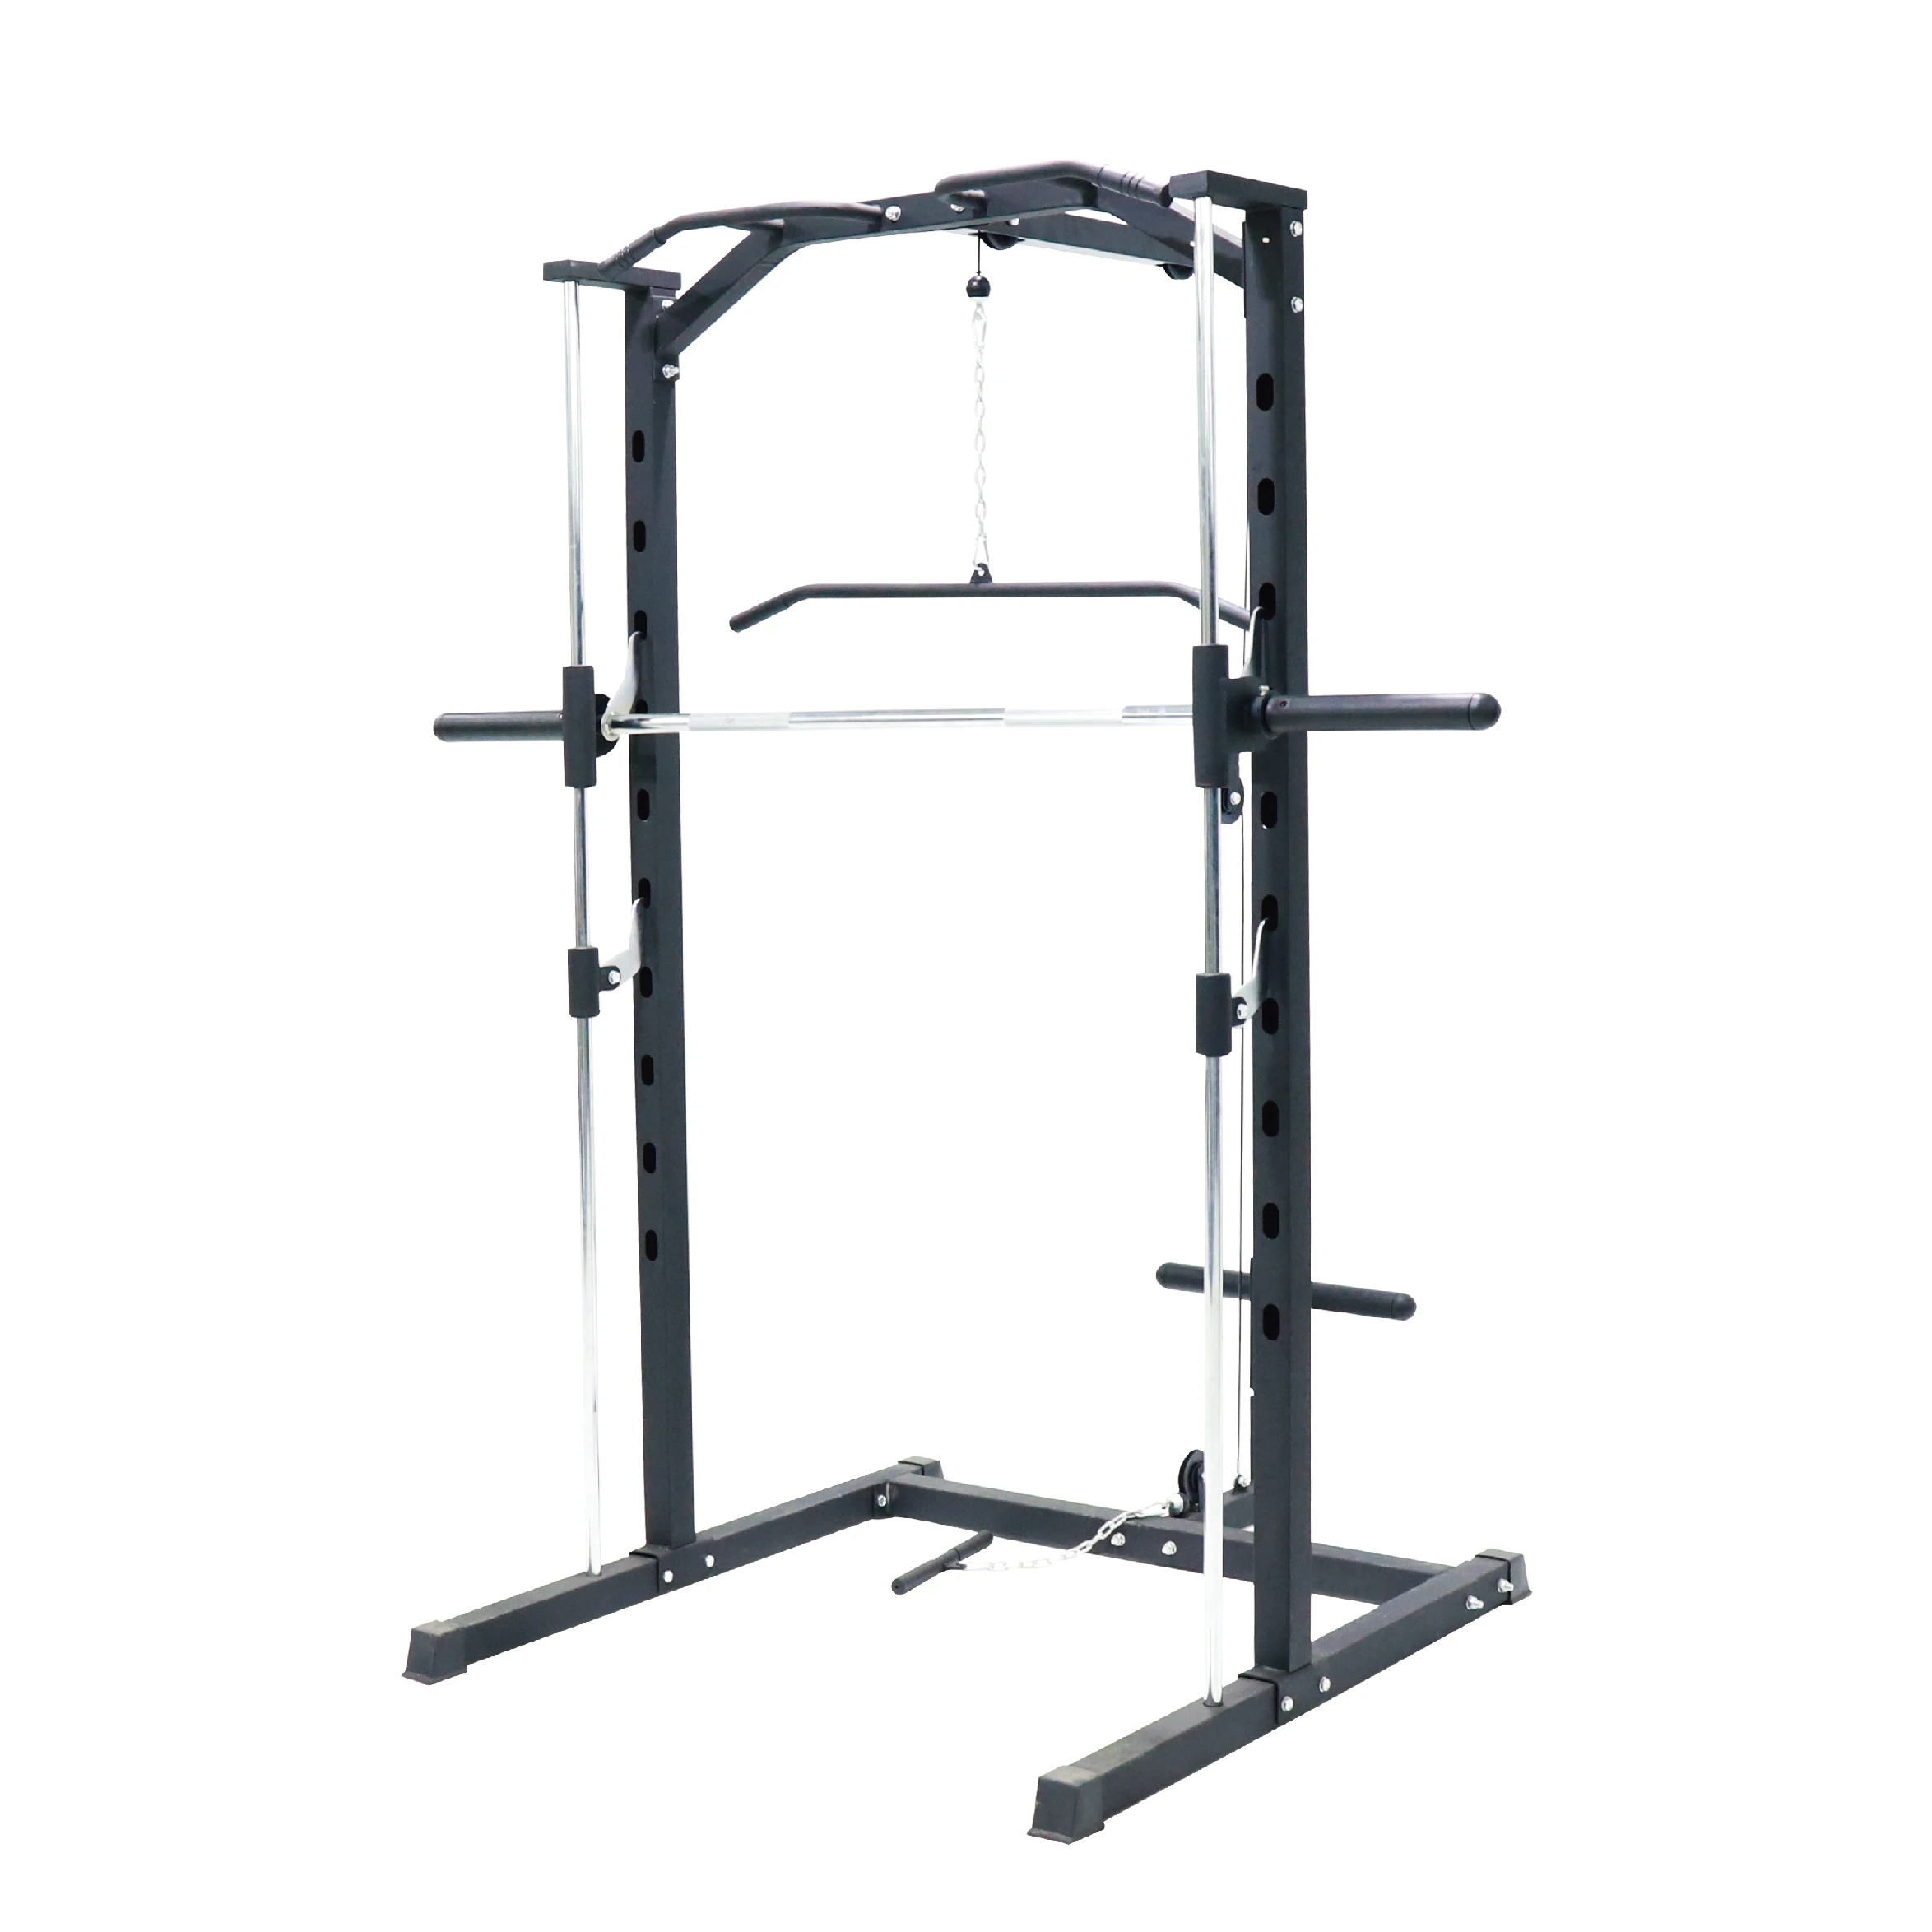 

RTS Smith Machine Stock in USA Power Rack with barbell bar Q235 steel 880lbs Capacity Gym Equipment Home Use Squat Cage